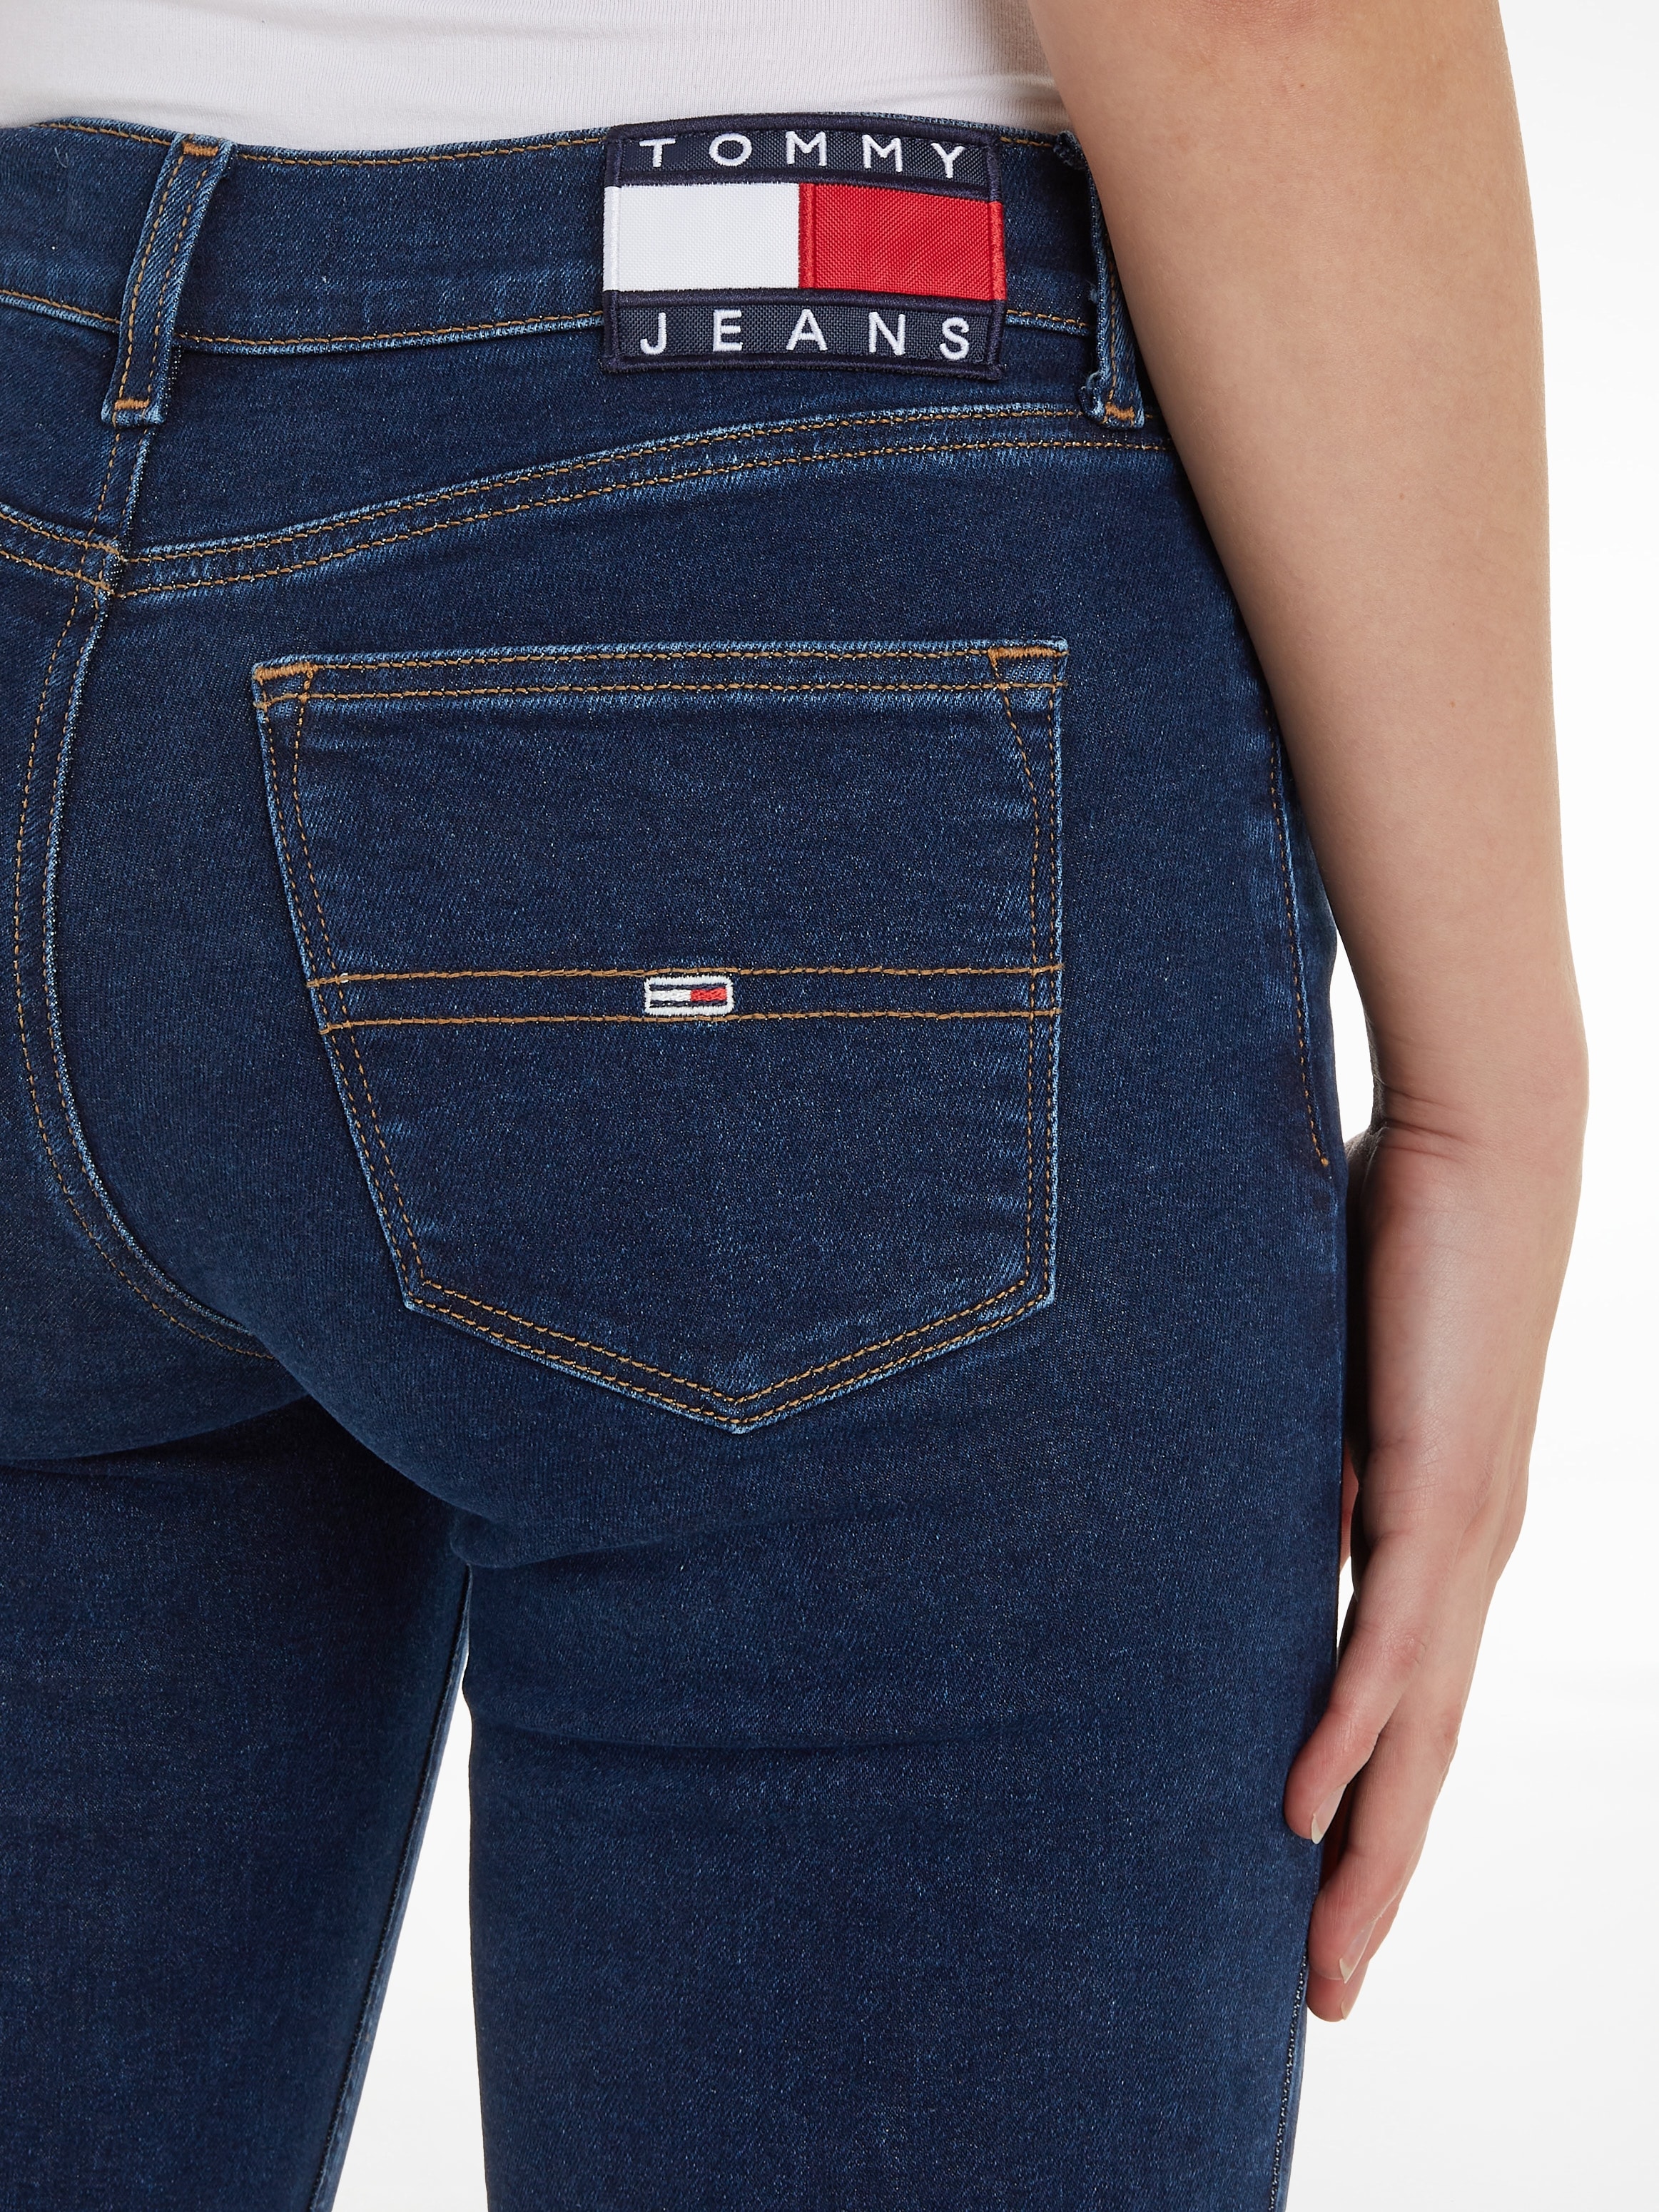 Tommy Jeans Skinny-fit-Jeans, mit Logobadge und Logostickerei